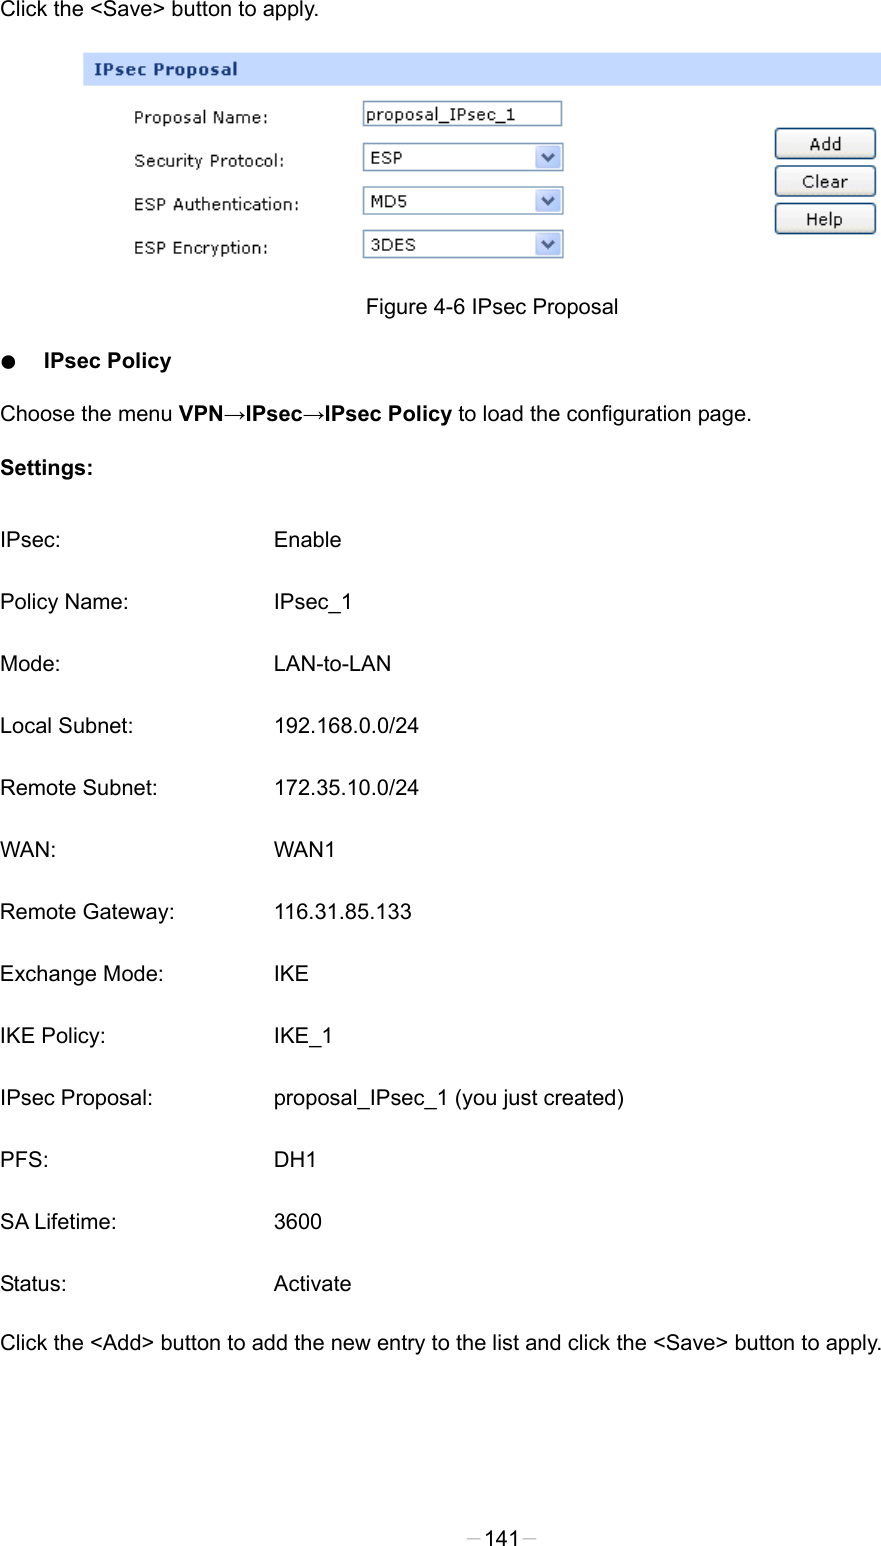  Click the &lt;Save&gt; button to apply.  Figure 4-6 IPsec Proposal ● IPsec Policy Choose the menu VPN→IPsec→IPsec Policy to load the configuration page.   Settings: IPsec: Enable Policy Name: IPsec_1 Mode:  LAN-to-LAN Local Subnet: 192.168.0.0/24 Remote Subnet: 172.35.10.0/24 WAN: WAN1 Remote Gateway: 116.31.85.133 Exchange Mode:  IKE IKE Policy:  IKE_1 IPsec Proposal: proposal_IPsec_1 (you just created) PFS: DH1 SA Lifetime: 3600 Status: Activate Click the &lt;Add&gt; button to add the new entry to the list and click the &lt;Save&gt; button to apply. -141- 